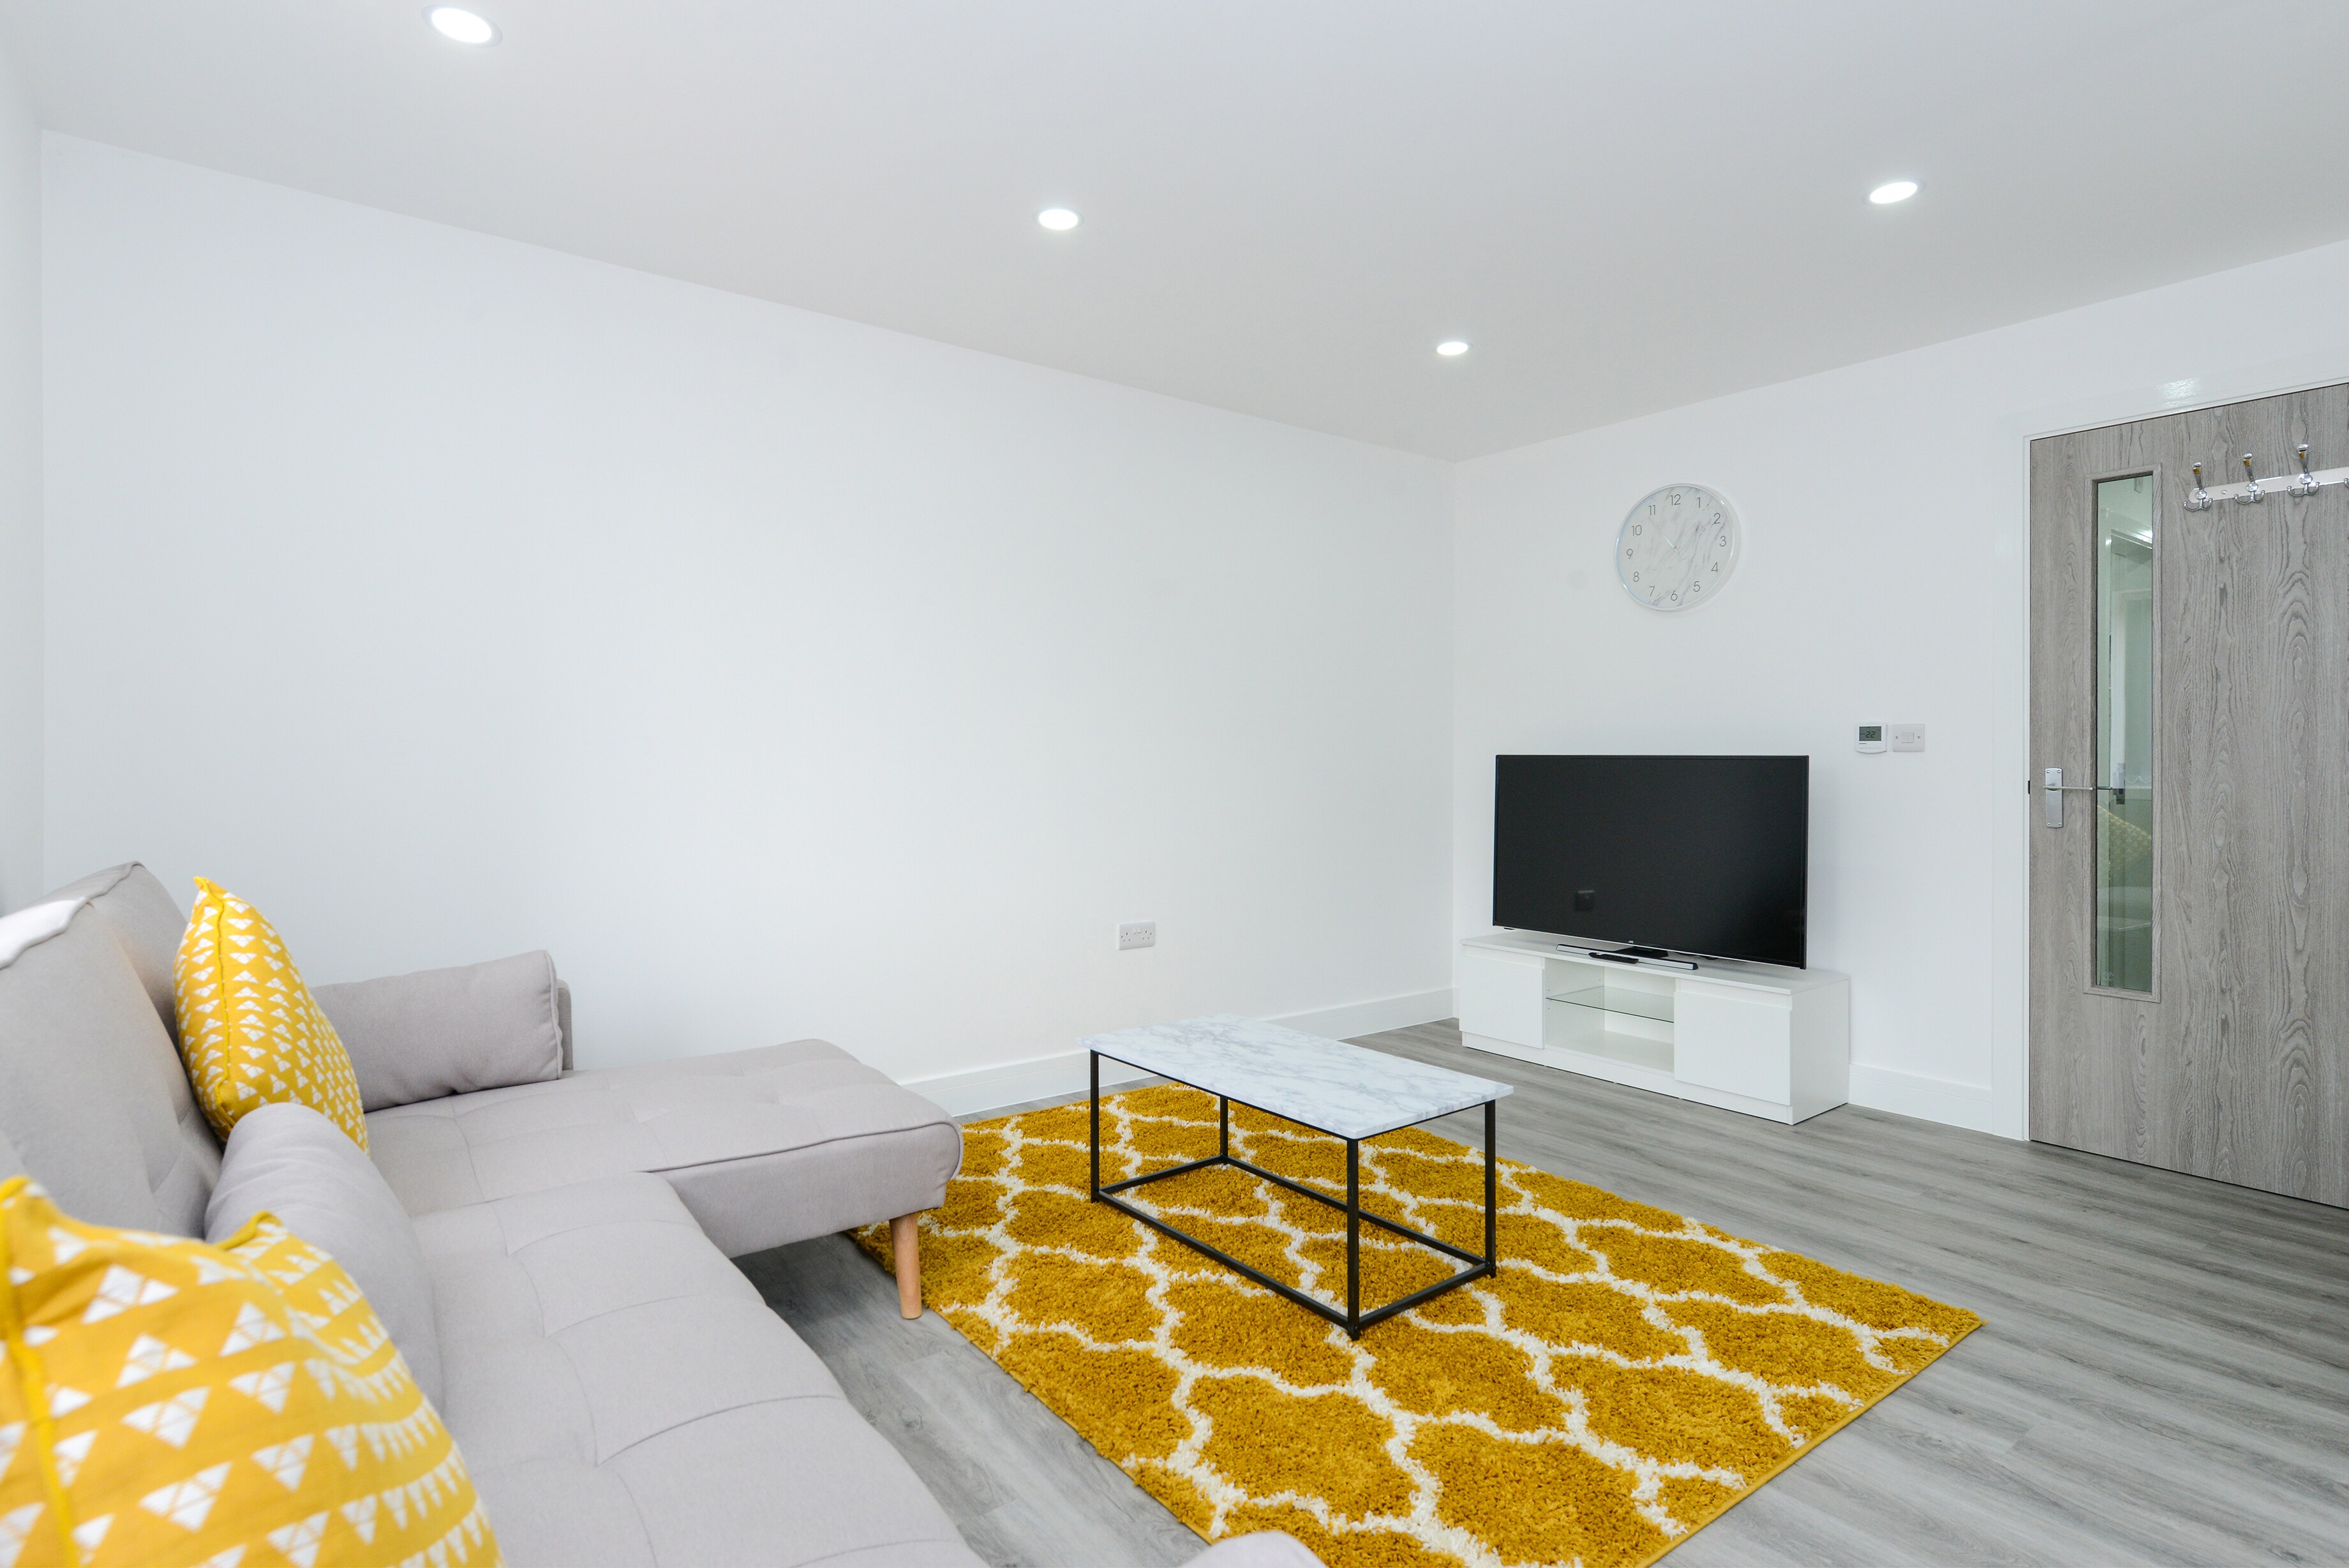 Property Image 1 - Sleek and Stylish 2bed Home, Low Carbon, Parking